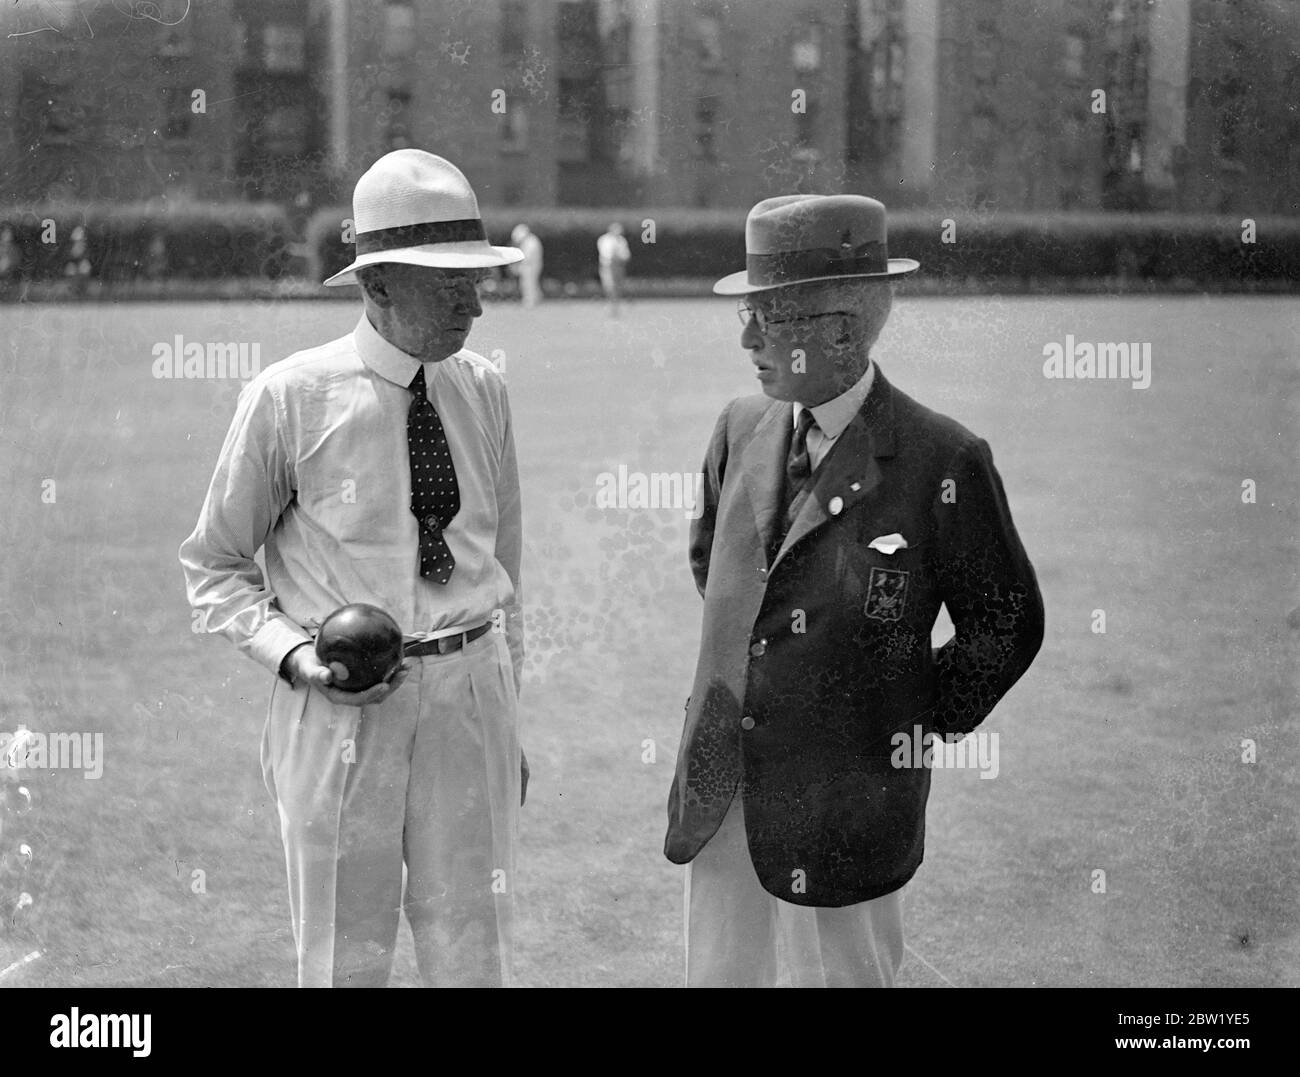 Former South Australian Gov and Premier compete in Paddington bowls tournament. Sir Henry Galway, 79-year-old former governor general of South Australia and Sir Henry Barwell, ex-premier of South Australia are competing in the pairs at the bowls tournament at the Paddington bowls club, Castellin road. Photo shows, Sir Henry Galway and Sir Henry Barwell (Panama hat) at the bowls tournament. 10. June 1937 Stock Photo